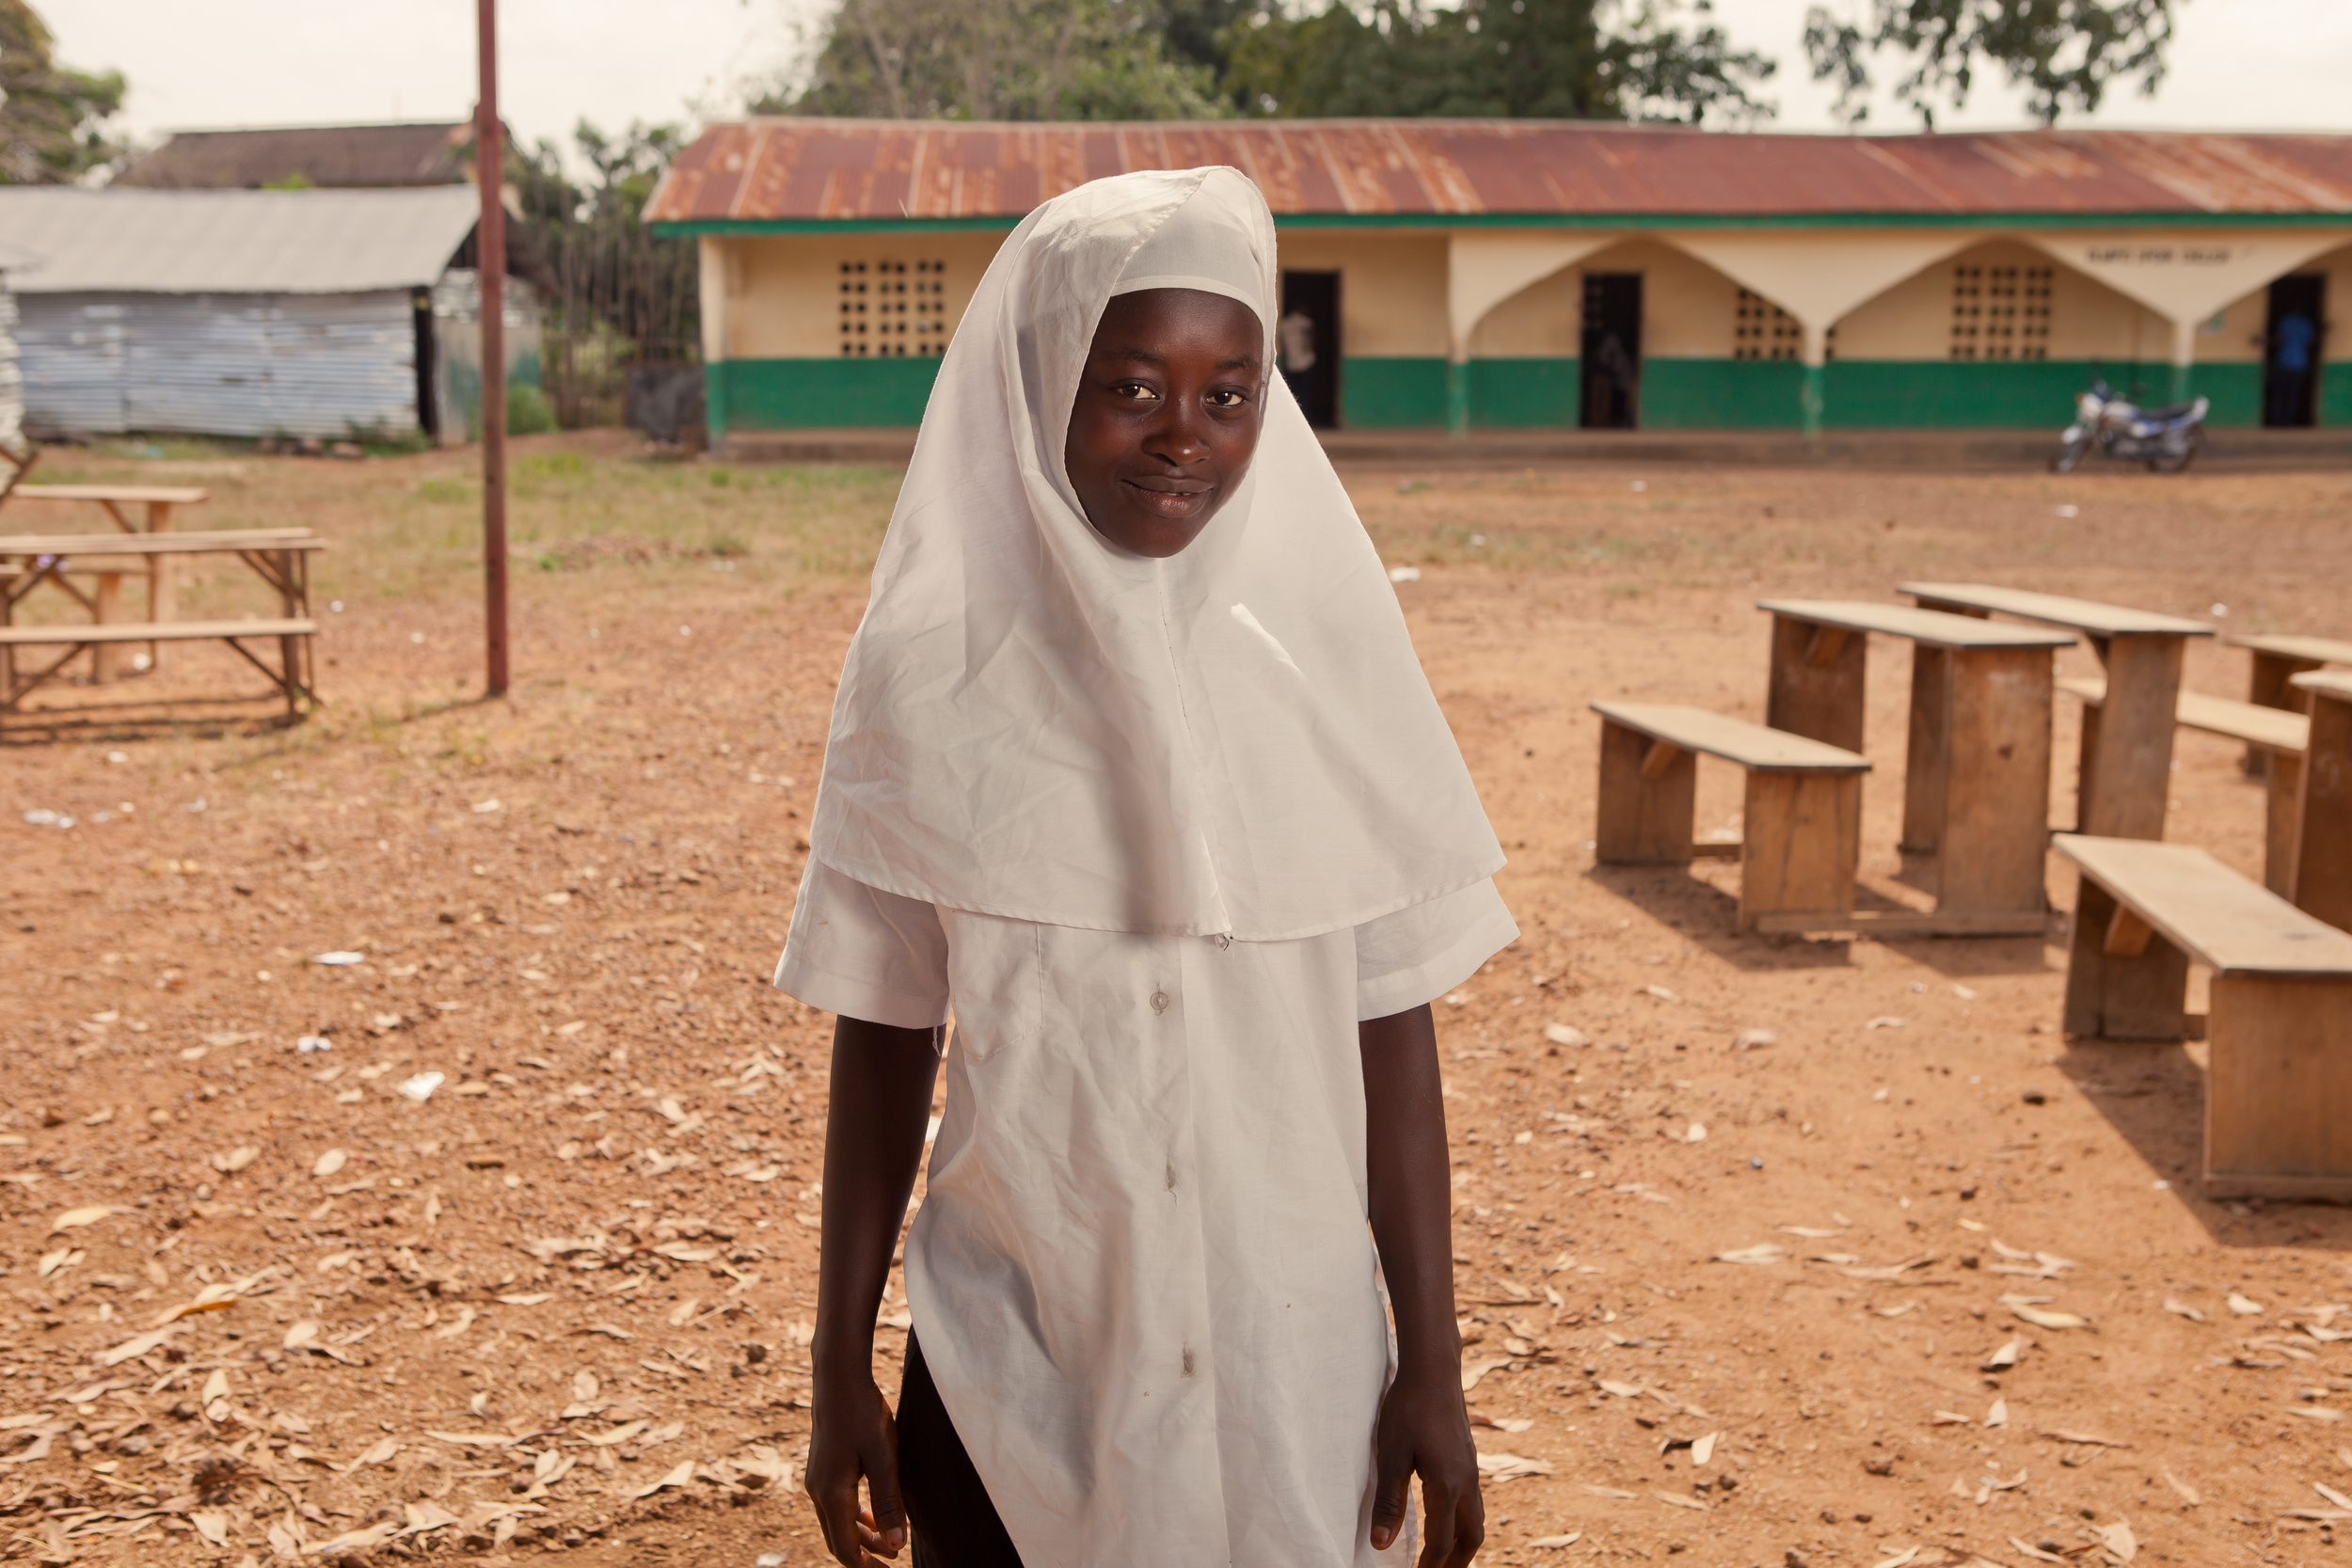  She's the First Scholar Kadiatu, 14, wants to be president! She wants to provide free education to girls in Sierra Leone. 